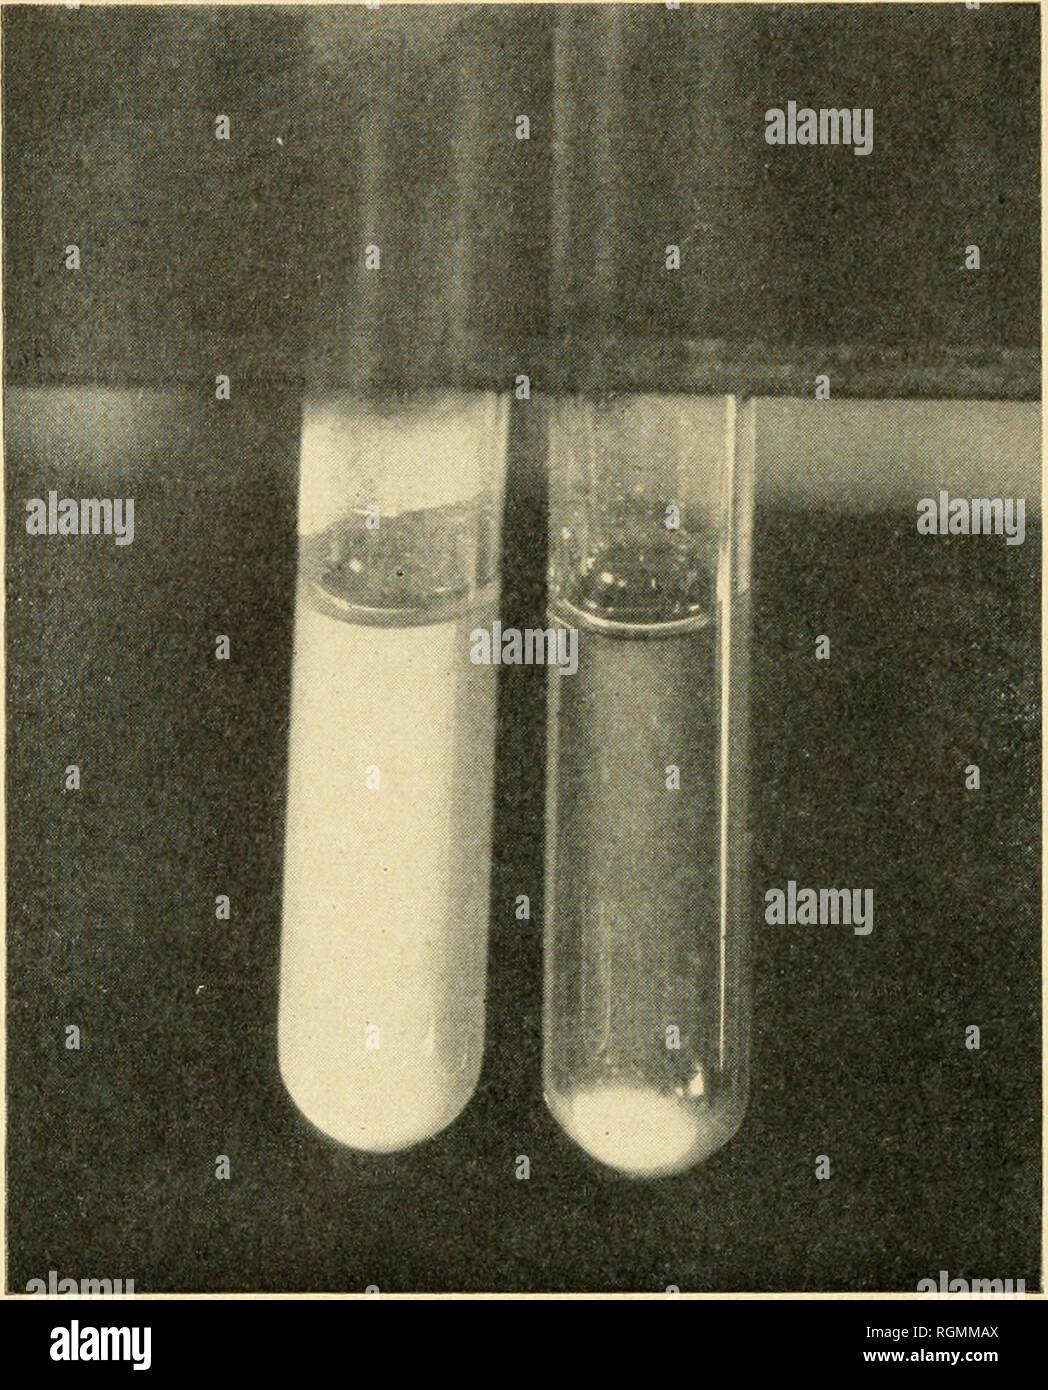 . Bulletin - Massachusetts Agricultural Experiment Station. Agriculture -- Massachusetts. Figure 16. Macroscopic Tube Agglutination Test. Ttie tube on the left shows a negative reaction, and the tube on the right a positive reaction. Refer to question 38. i ! r â¢ I  â â .*&gt;w wKtKr ^1 1^ â ^ â Figure 17. The Rapid Serum Agglutination Test. The mixtures'in the squares on the left show a negative reaction, and the mixtures in the squares on the right a pibsitive reaction. Refer to question 39. (18). Please note that these images are extracted from scanned page images that may have been digi Stock Photo